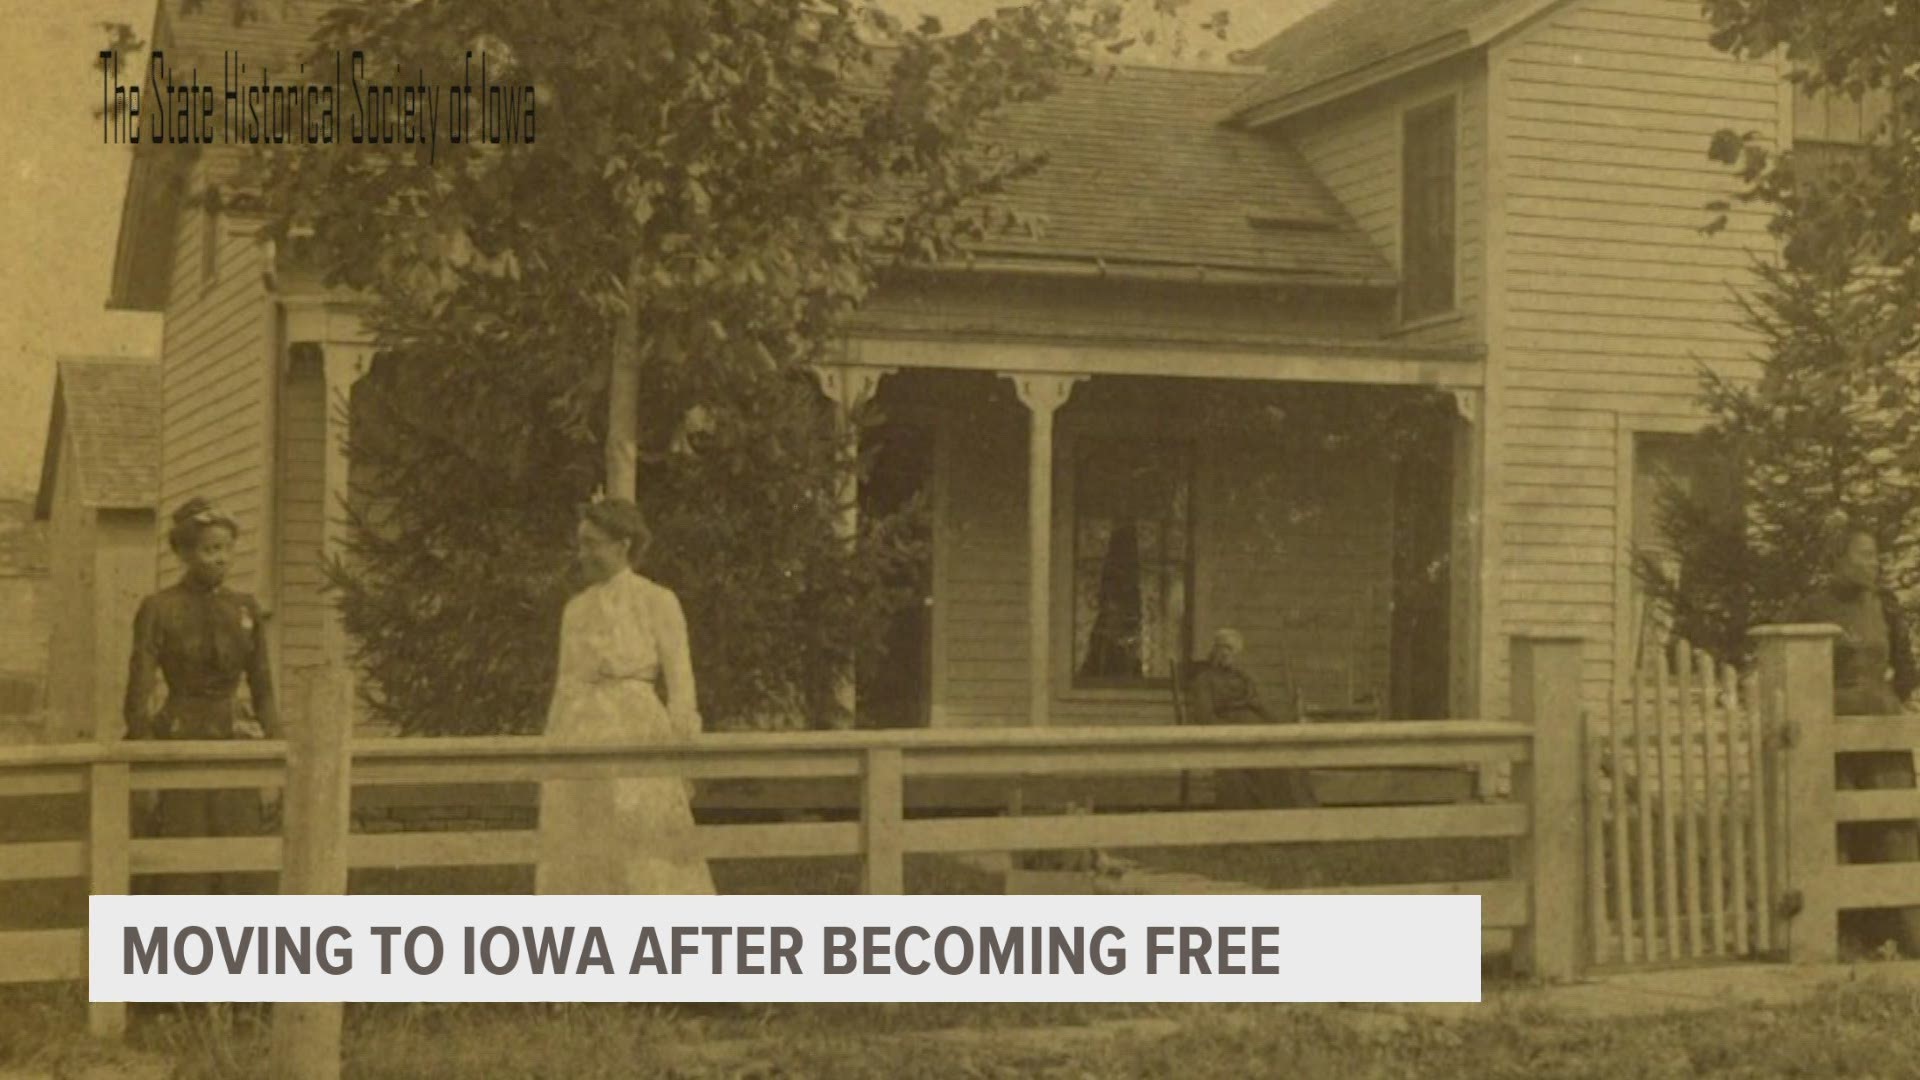 The McKee family moved to Iowa in 1870, a few years after the Emancipation Proclamation was signed. They were previously enslaved in Virginia.